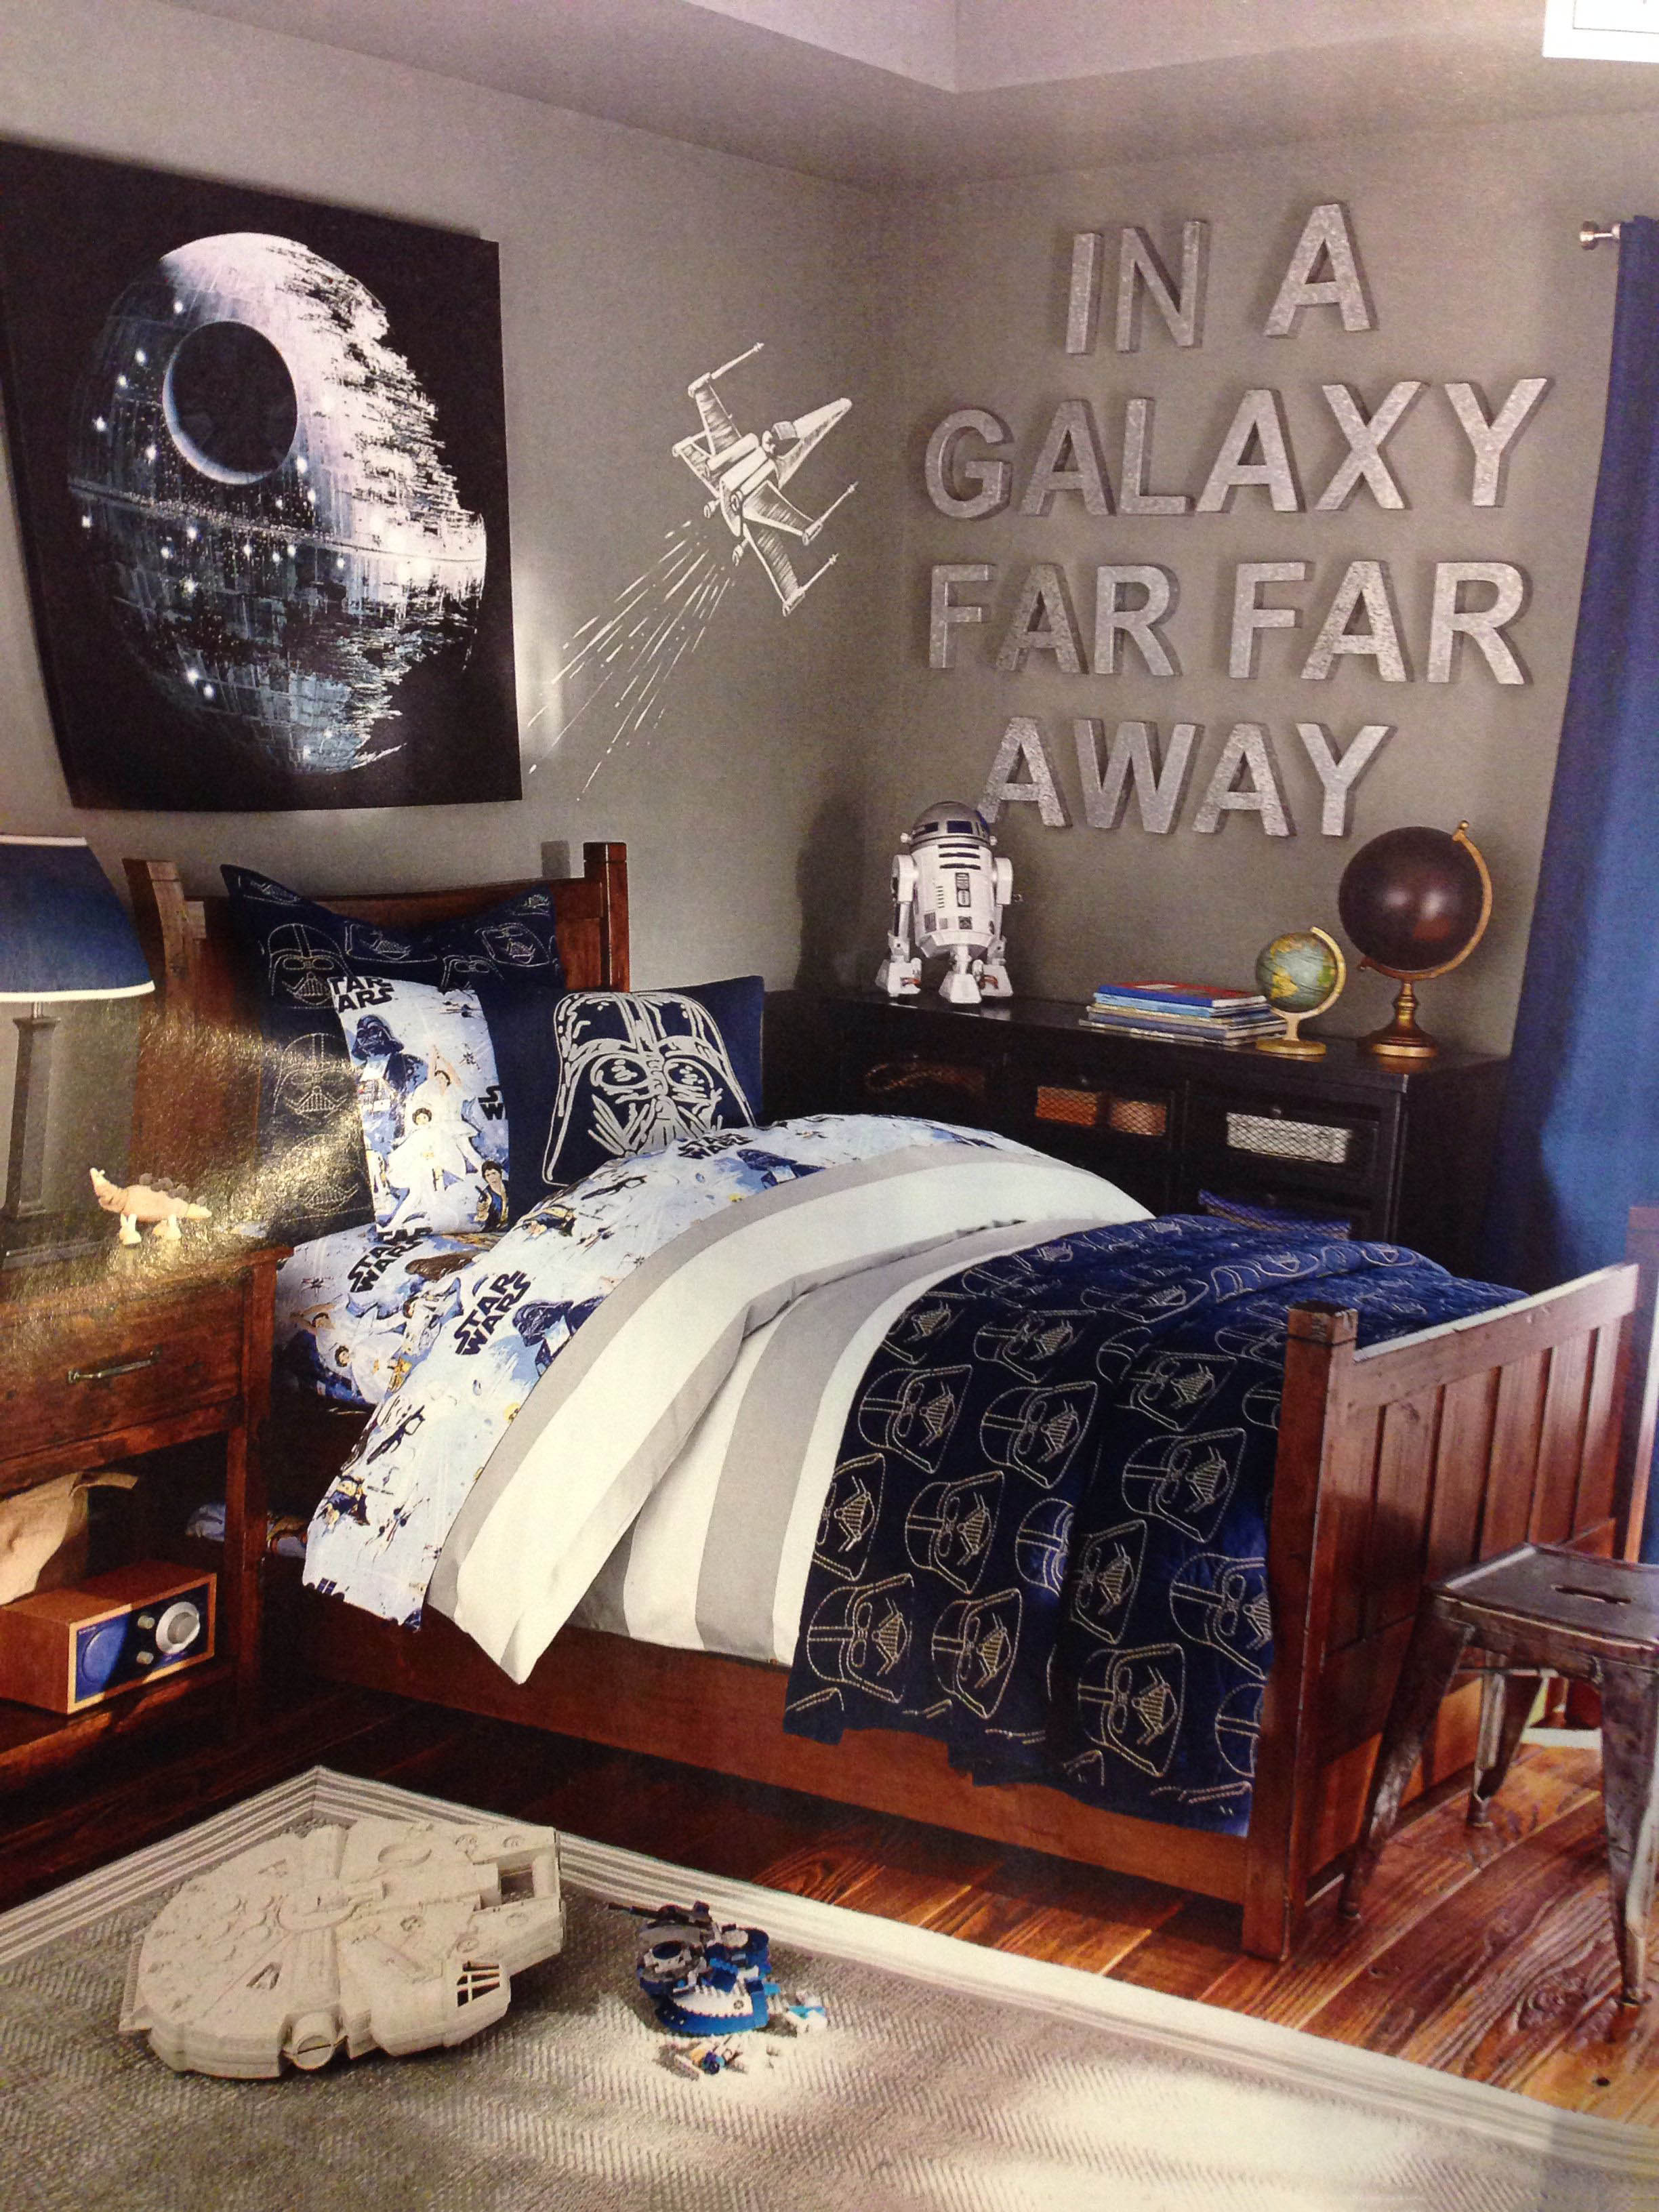 You can always hang metallic lettering to really finish off your Star Wars bedroom.